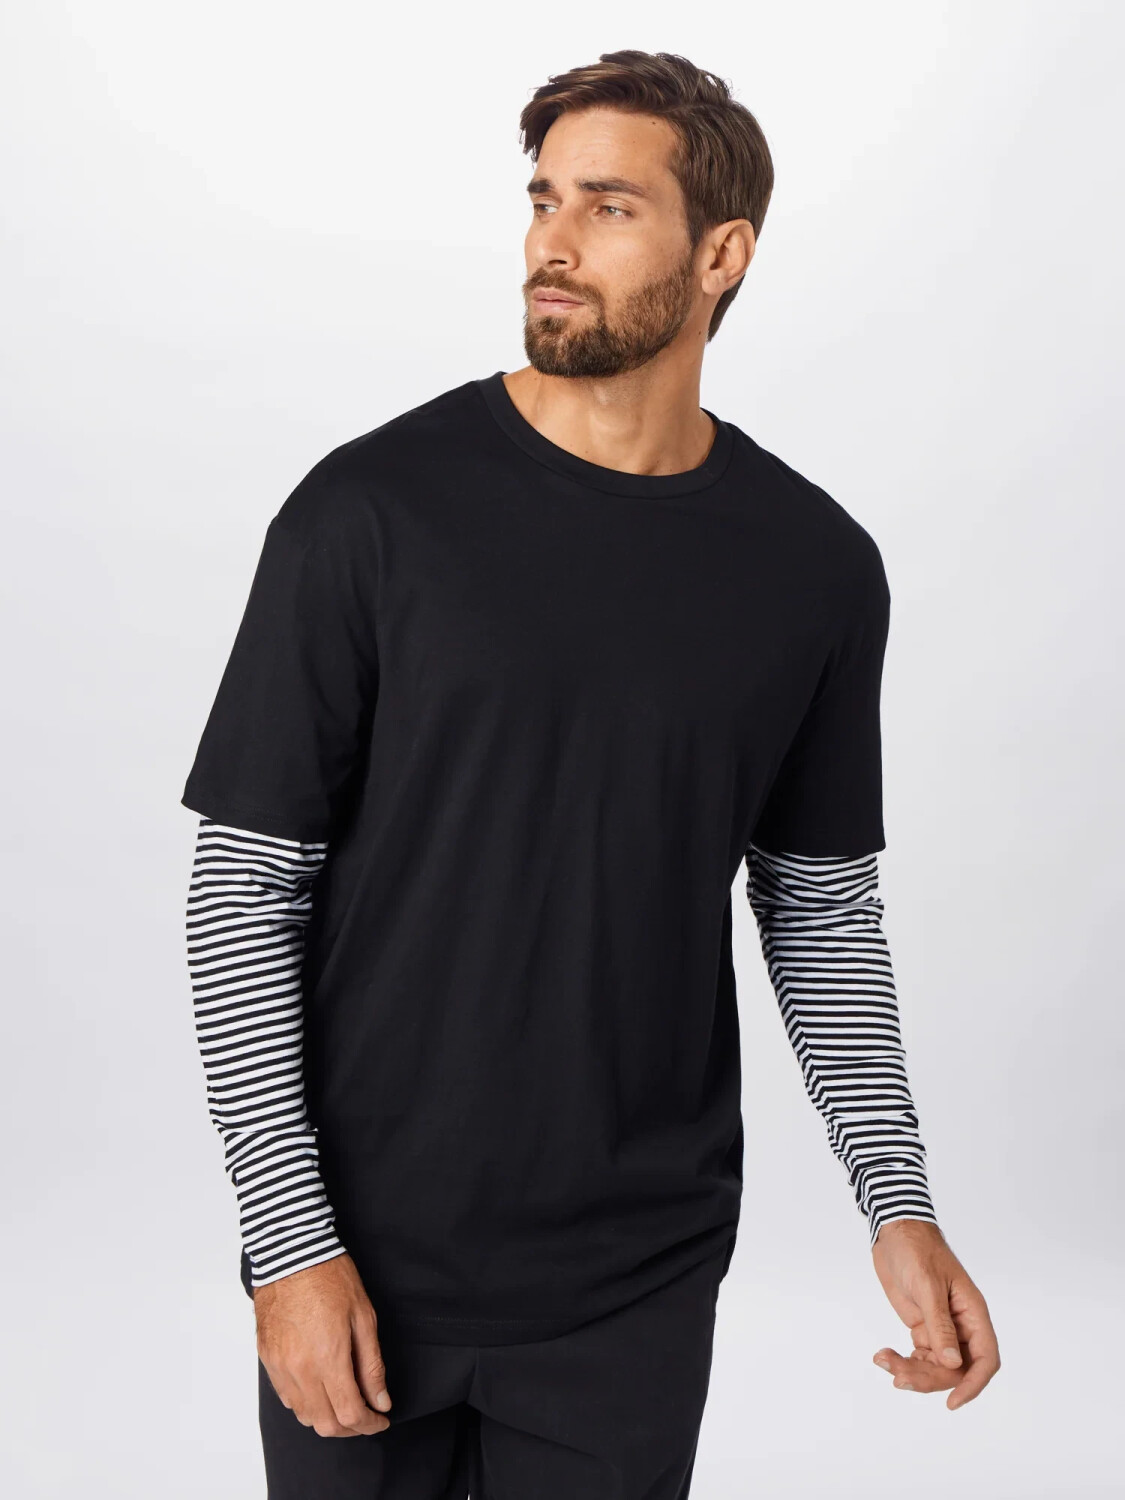 Buy Deals from Striped Layer black Classics Oversized on (TB3498) (Today) Best LS Double Urban £11.99 Tee –